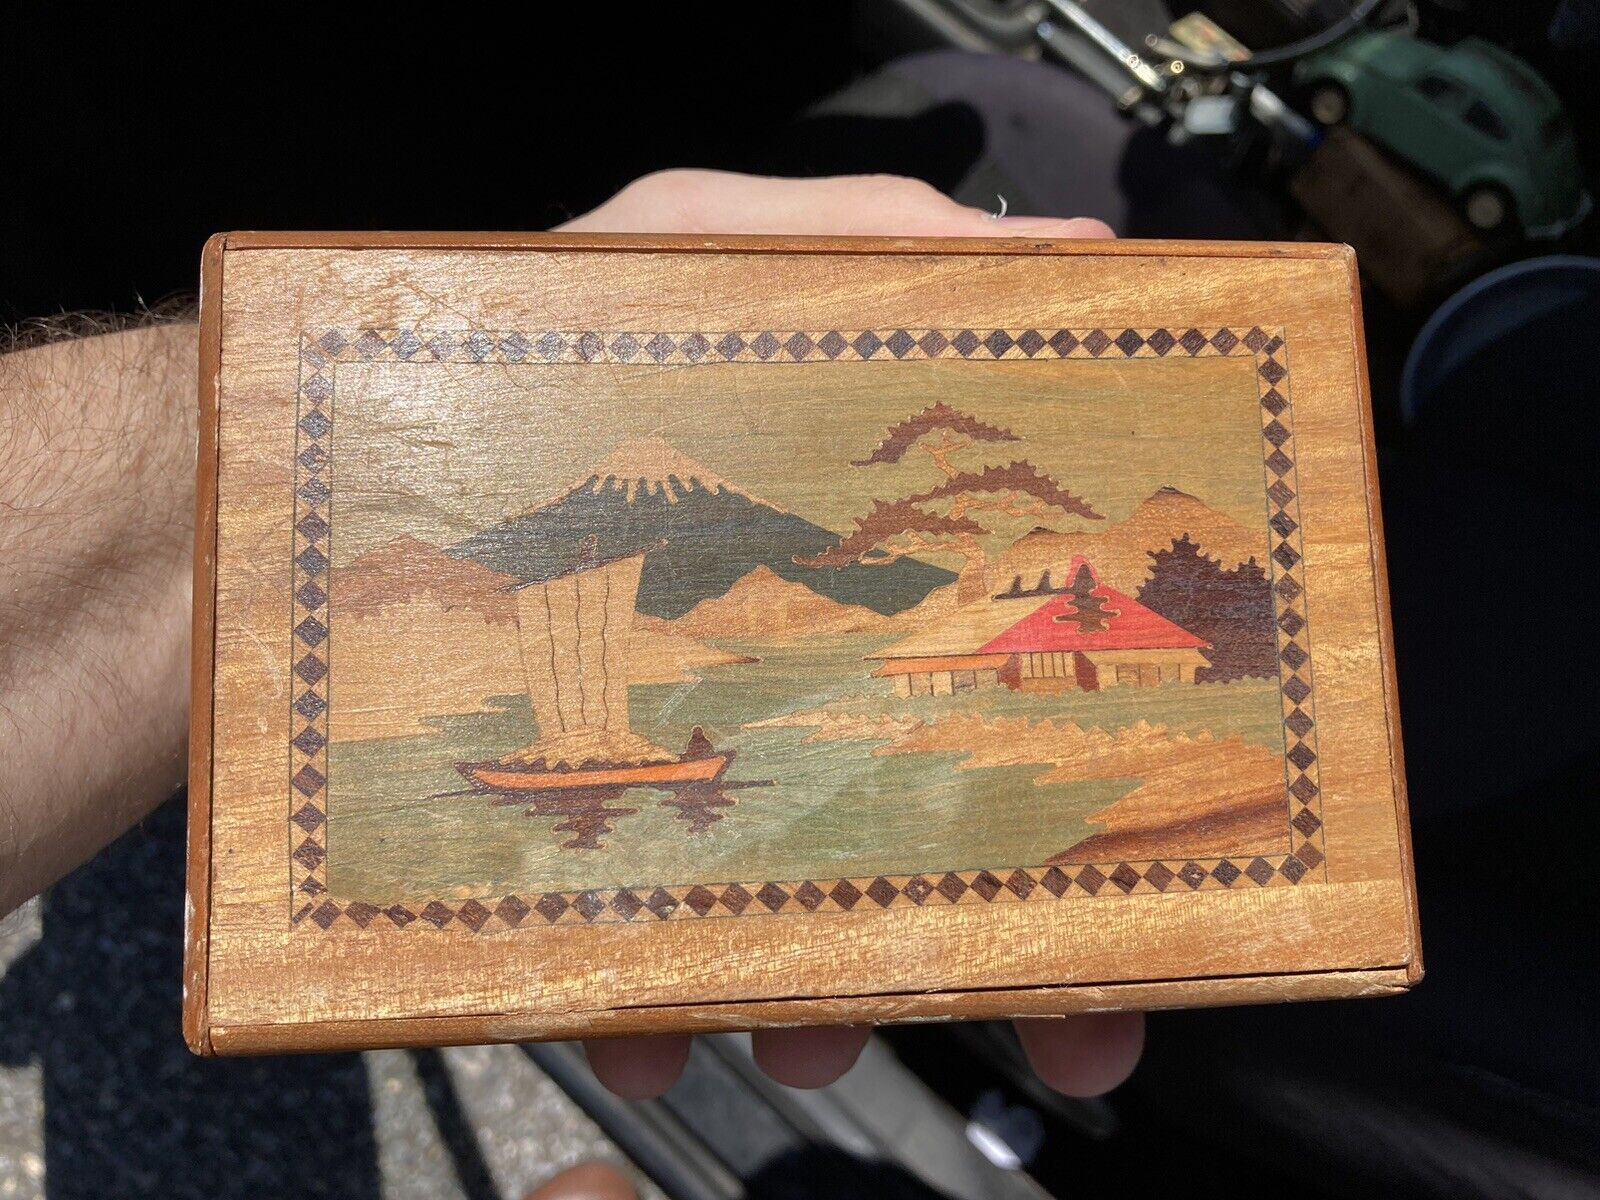 Japanese Inlaid Wooden Puzzle Box Mt. Fuji Scene Floral Marquetry Japan 1950s